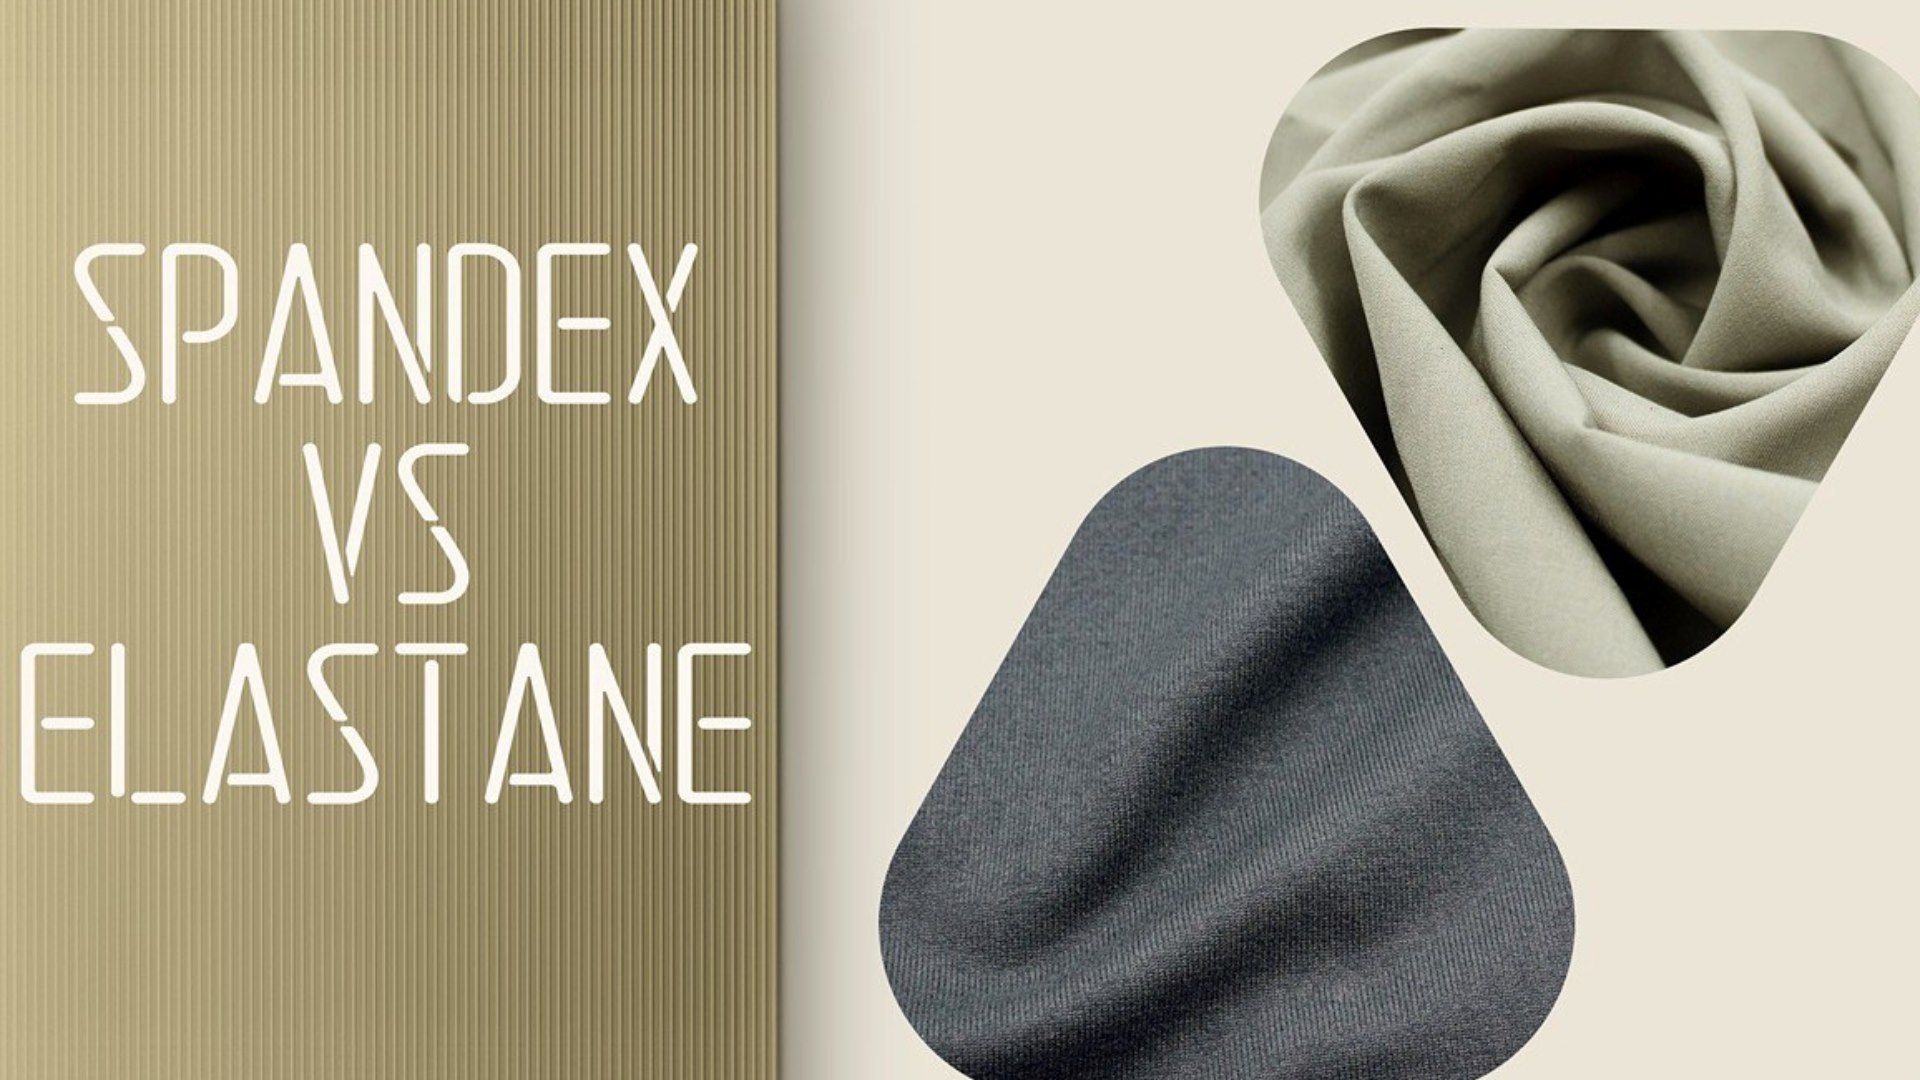 The Ultimate Showdown: Elastane Vs. Spandex - What's The Real Difference?